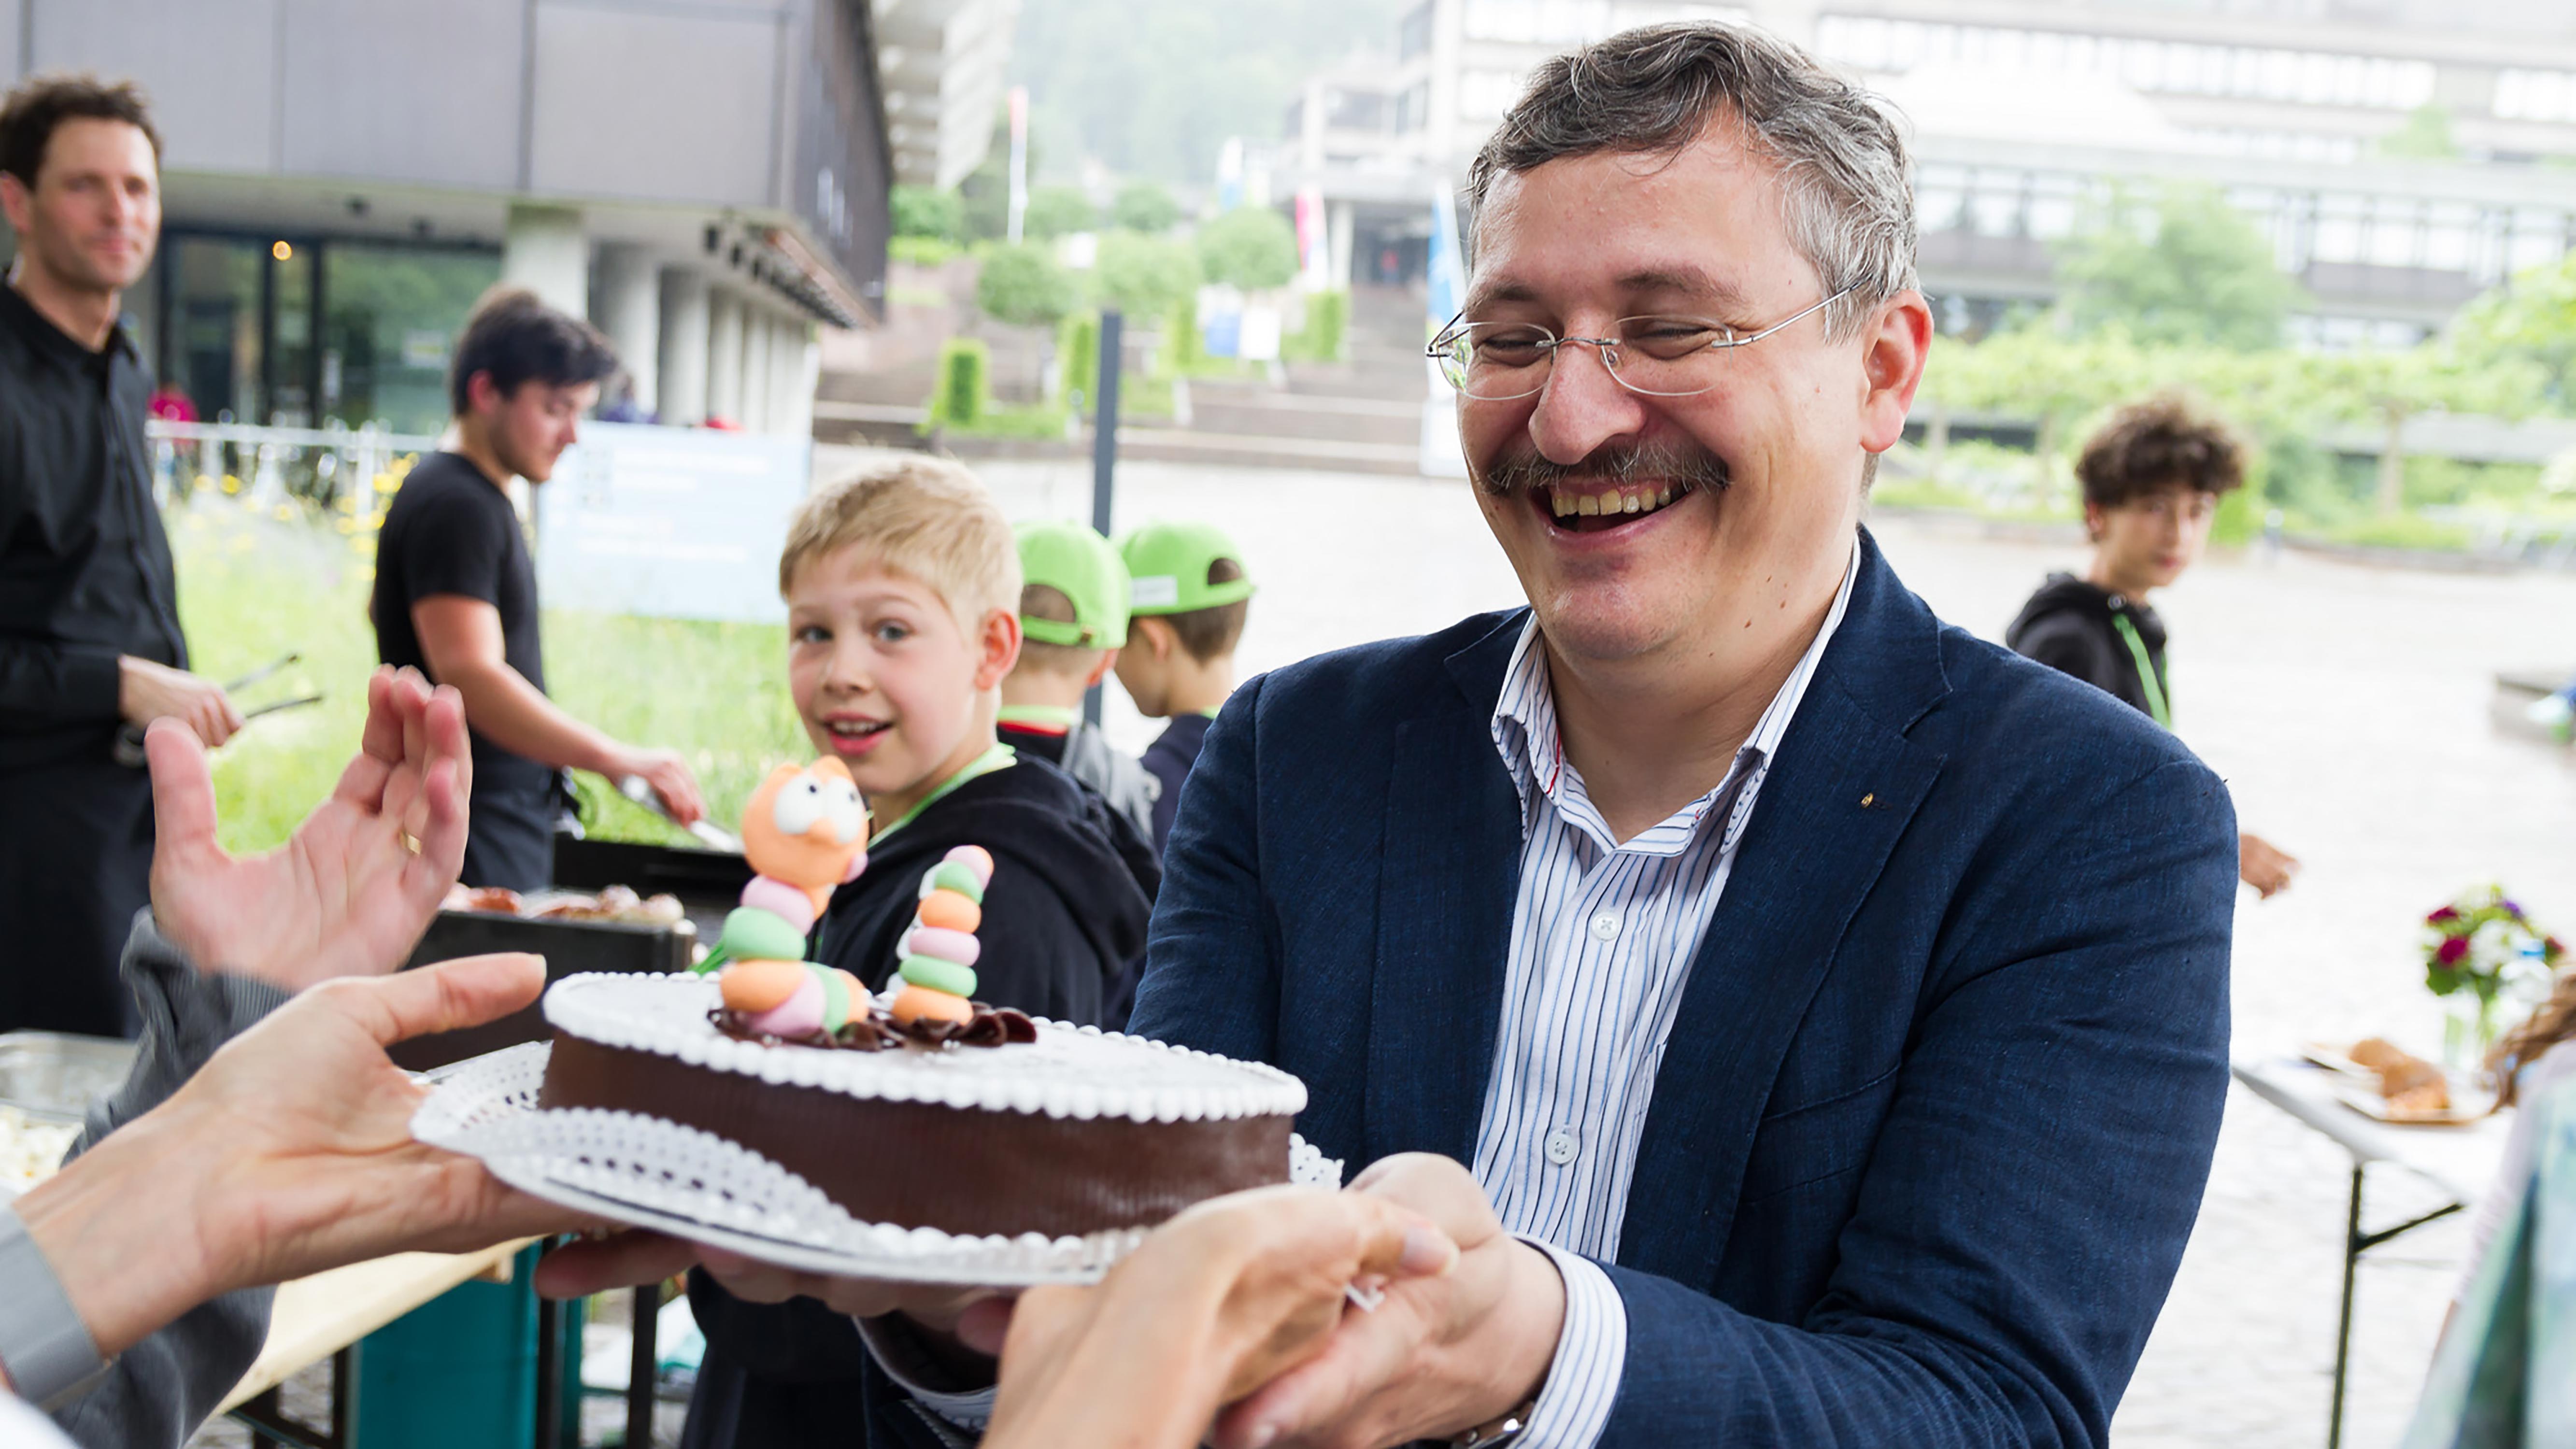 Happy birthday! At the Alumni & Family event in June 2016, Michael Hengartner is given a cake for his 50th birthday. The laughing worm is a reference to his success as a molecular biologist: Using the nematode Caenorhabditis elegans, Hengartner researched what mechanisms lead, for example, to a cell with damaged genetic material destroying itself and why this mechanism often no longer works in cancer cells. In 2006 he received the prestigious Latsis Prize for his research.